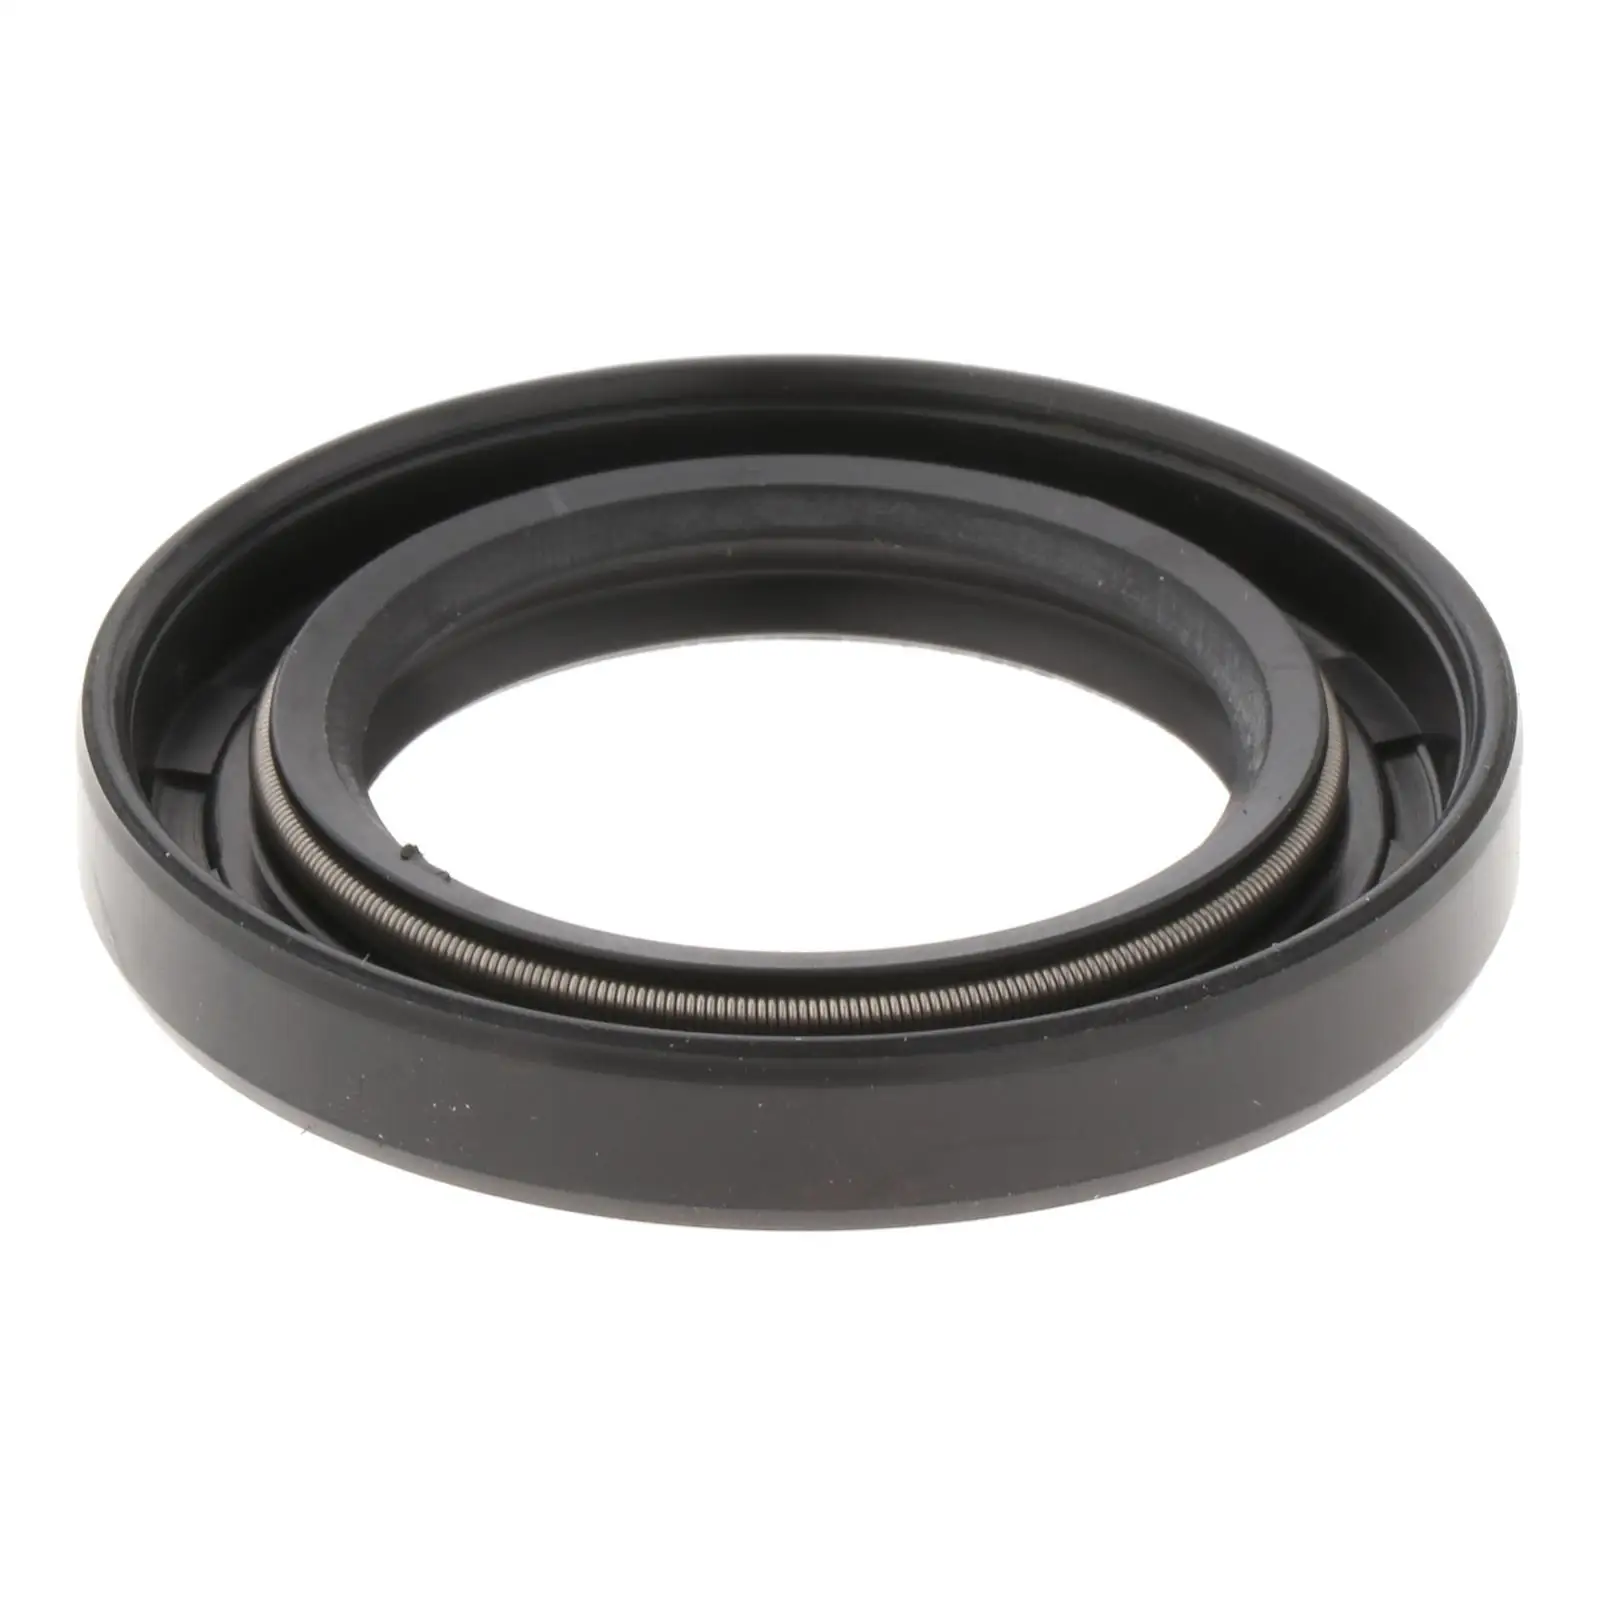 Oil Seal for  Outboard Motor 2T 60HP-90HP Accessory Replaces